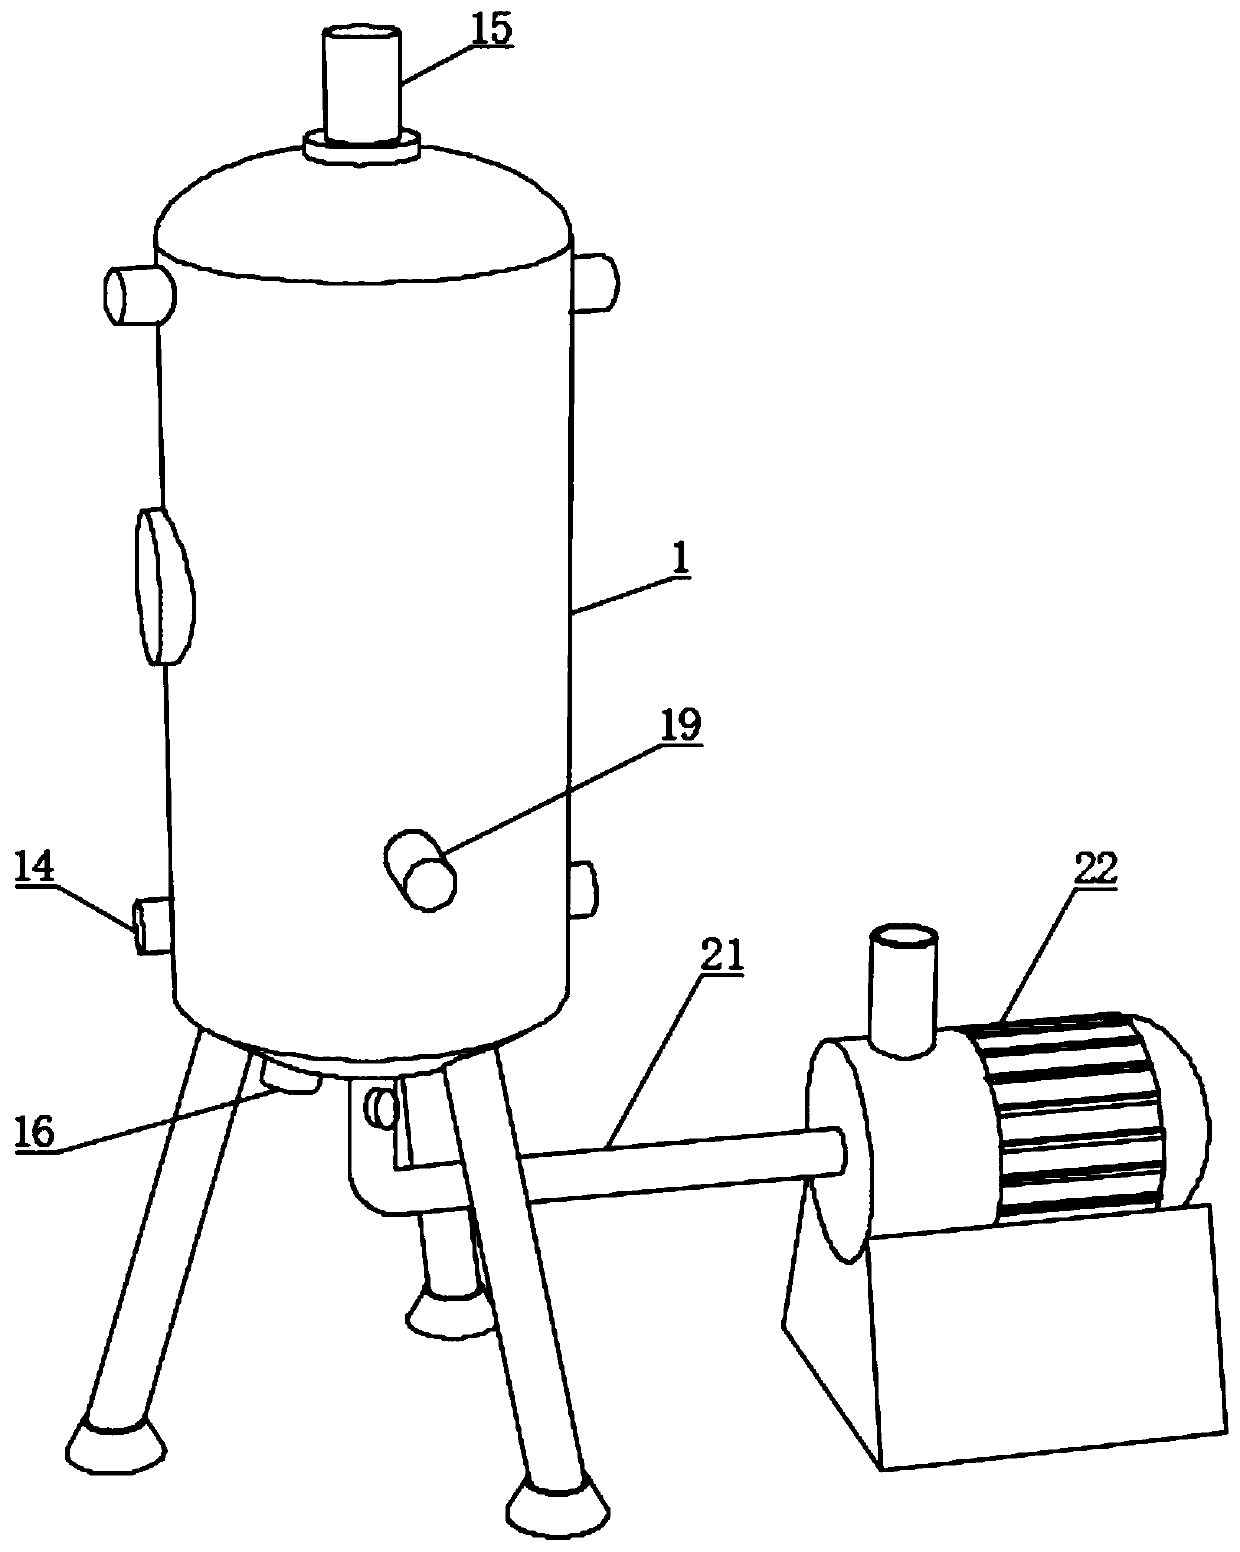 Double-effect combined inverted-cone-shaped graphite falling film evaporator